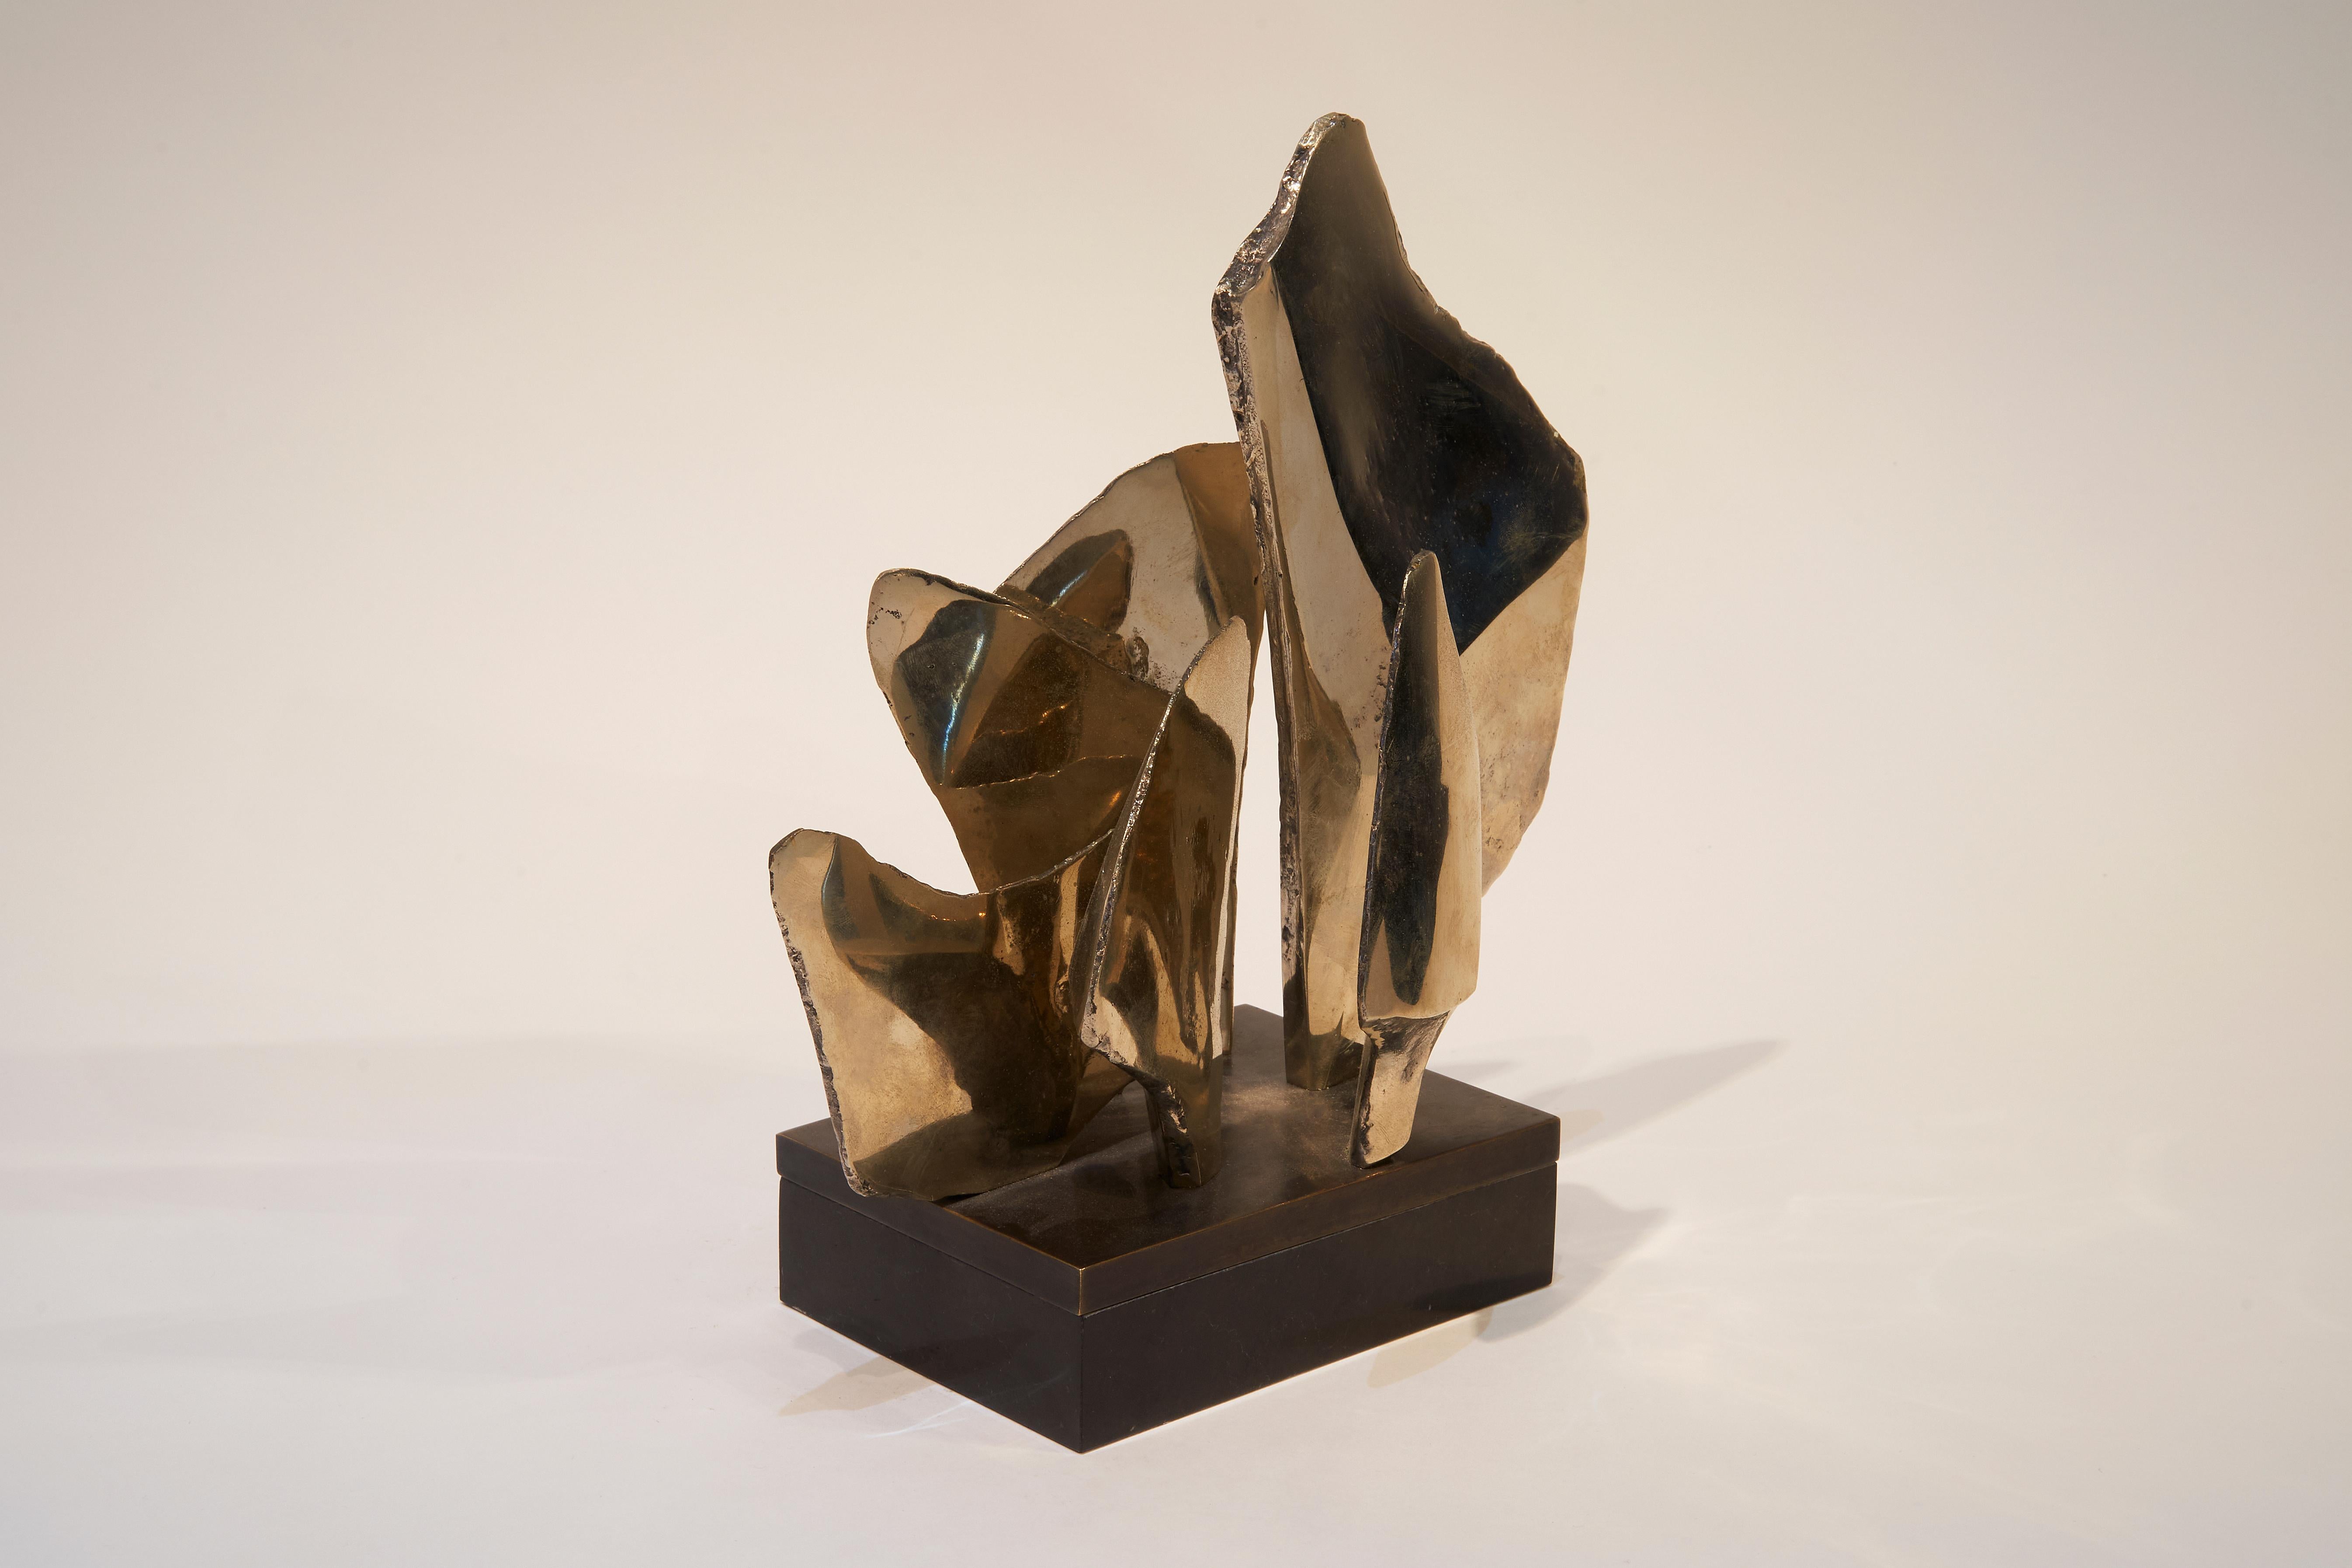 Bronze sculpture
Signed and numbered 73/300 on the base
Foundry : Da Prato, Pietrasanta, Italy.